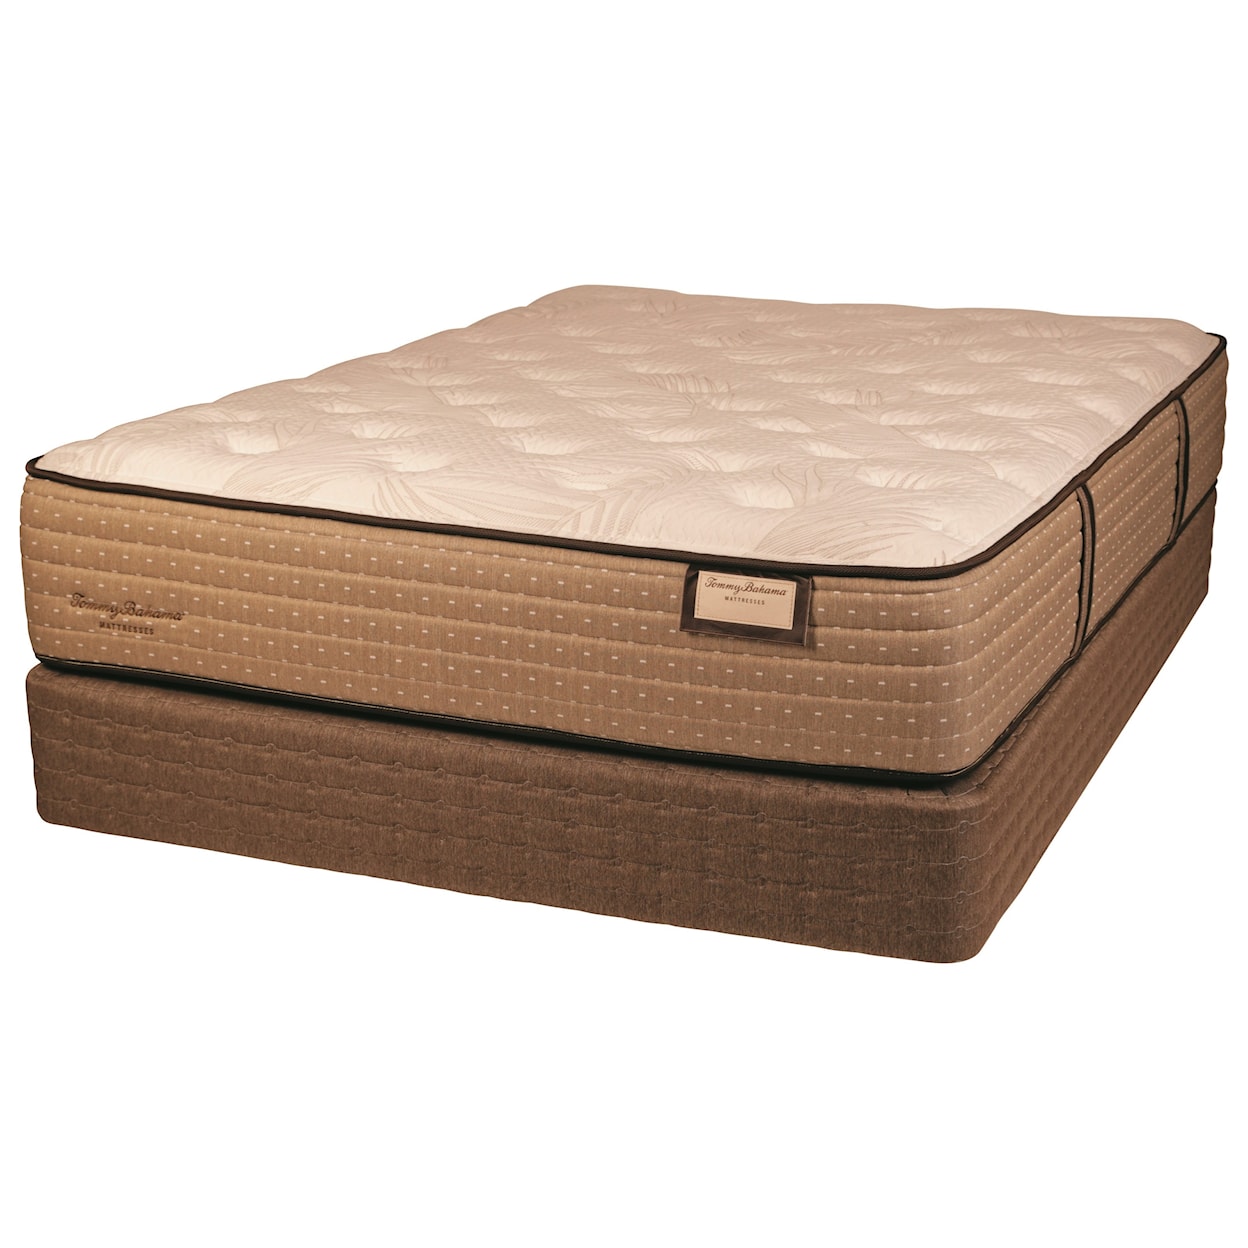 Therapedic Tommy Bahama Shake the Sand Firm 6034 Queen Firm Luxury Mattress Set